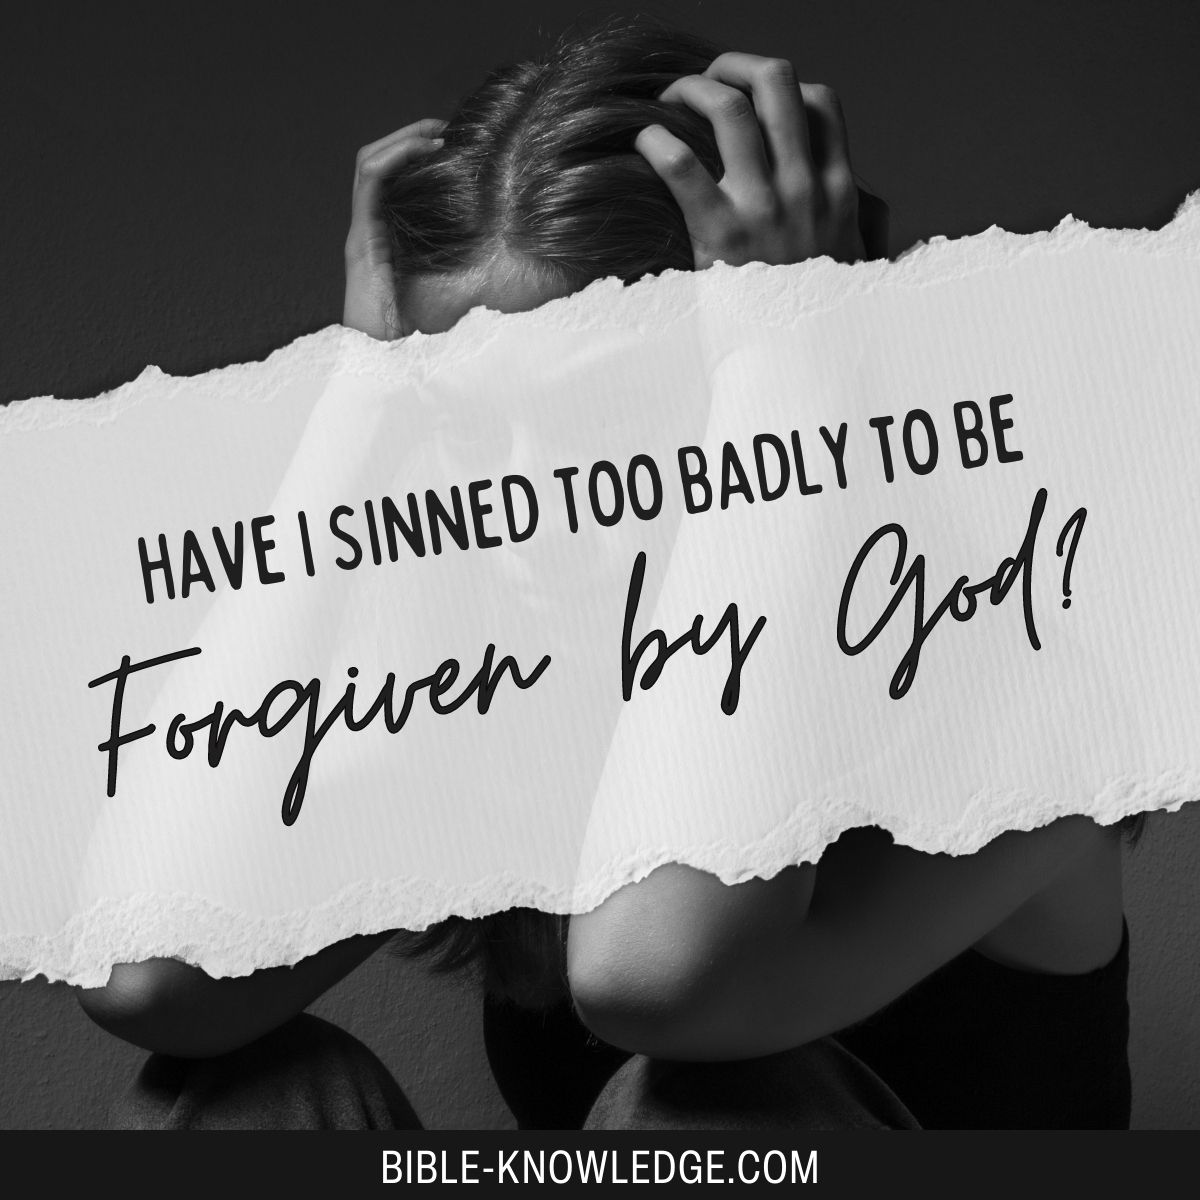 Have I Sinned Too Badly to Be Forgiven By God